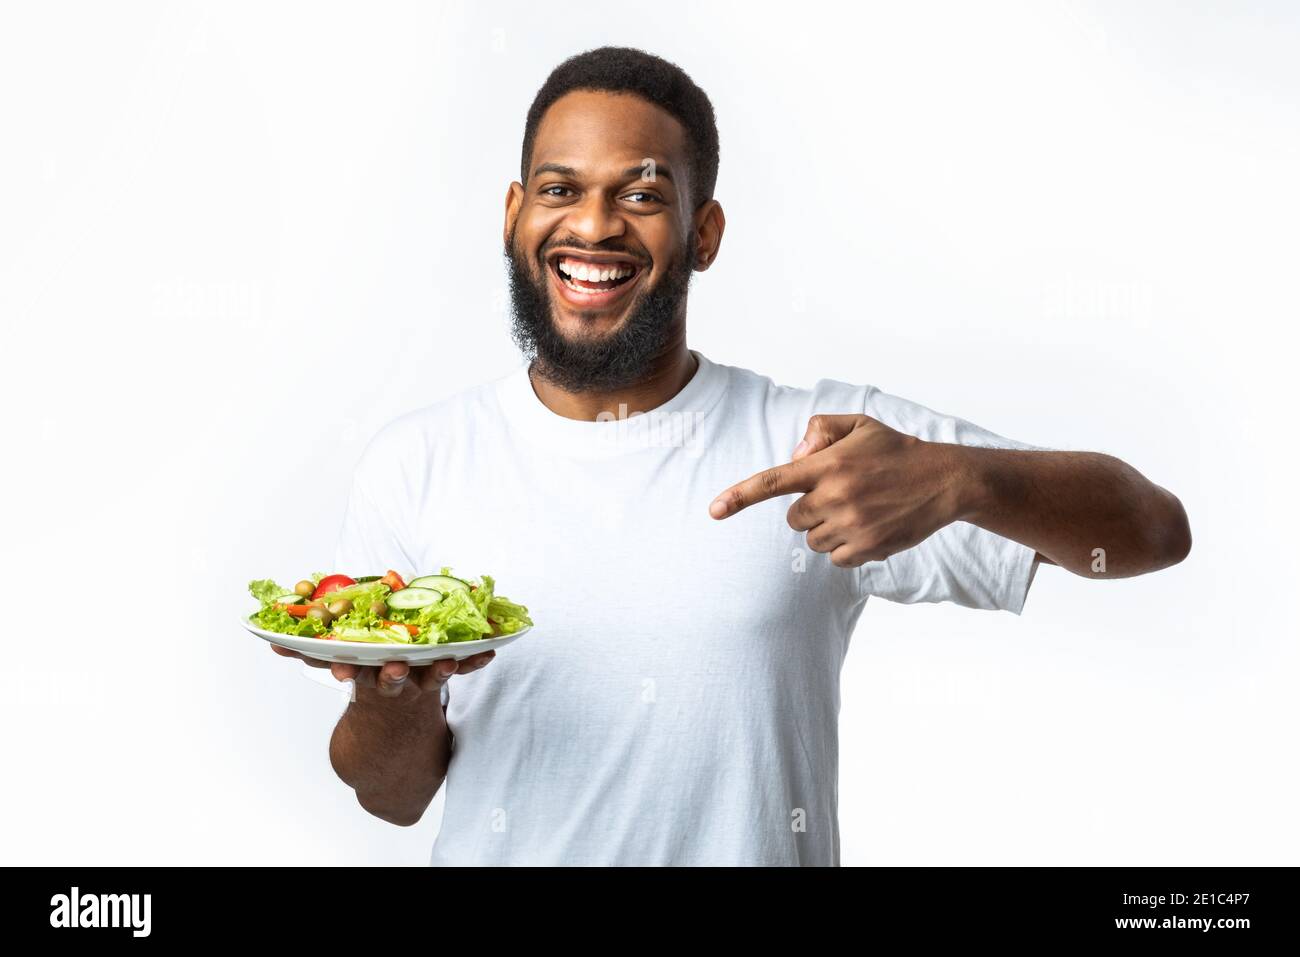 Cheerful Black Guy Pointing Finger At Salad Over White Background Stock Photo